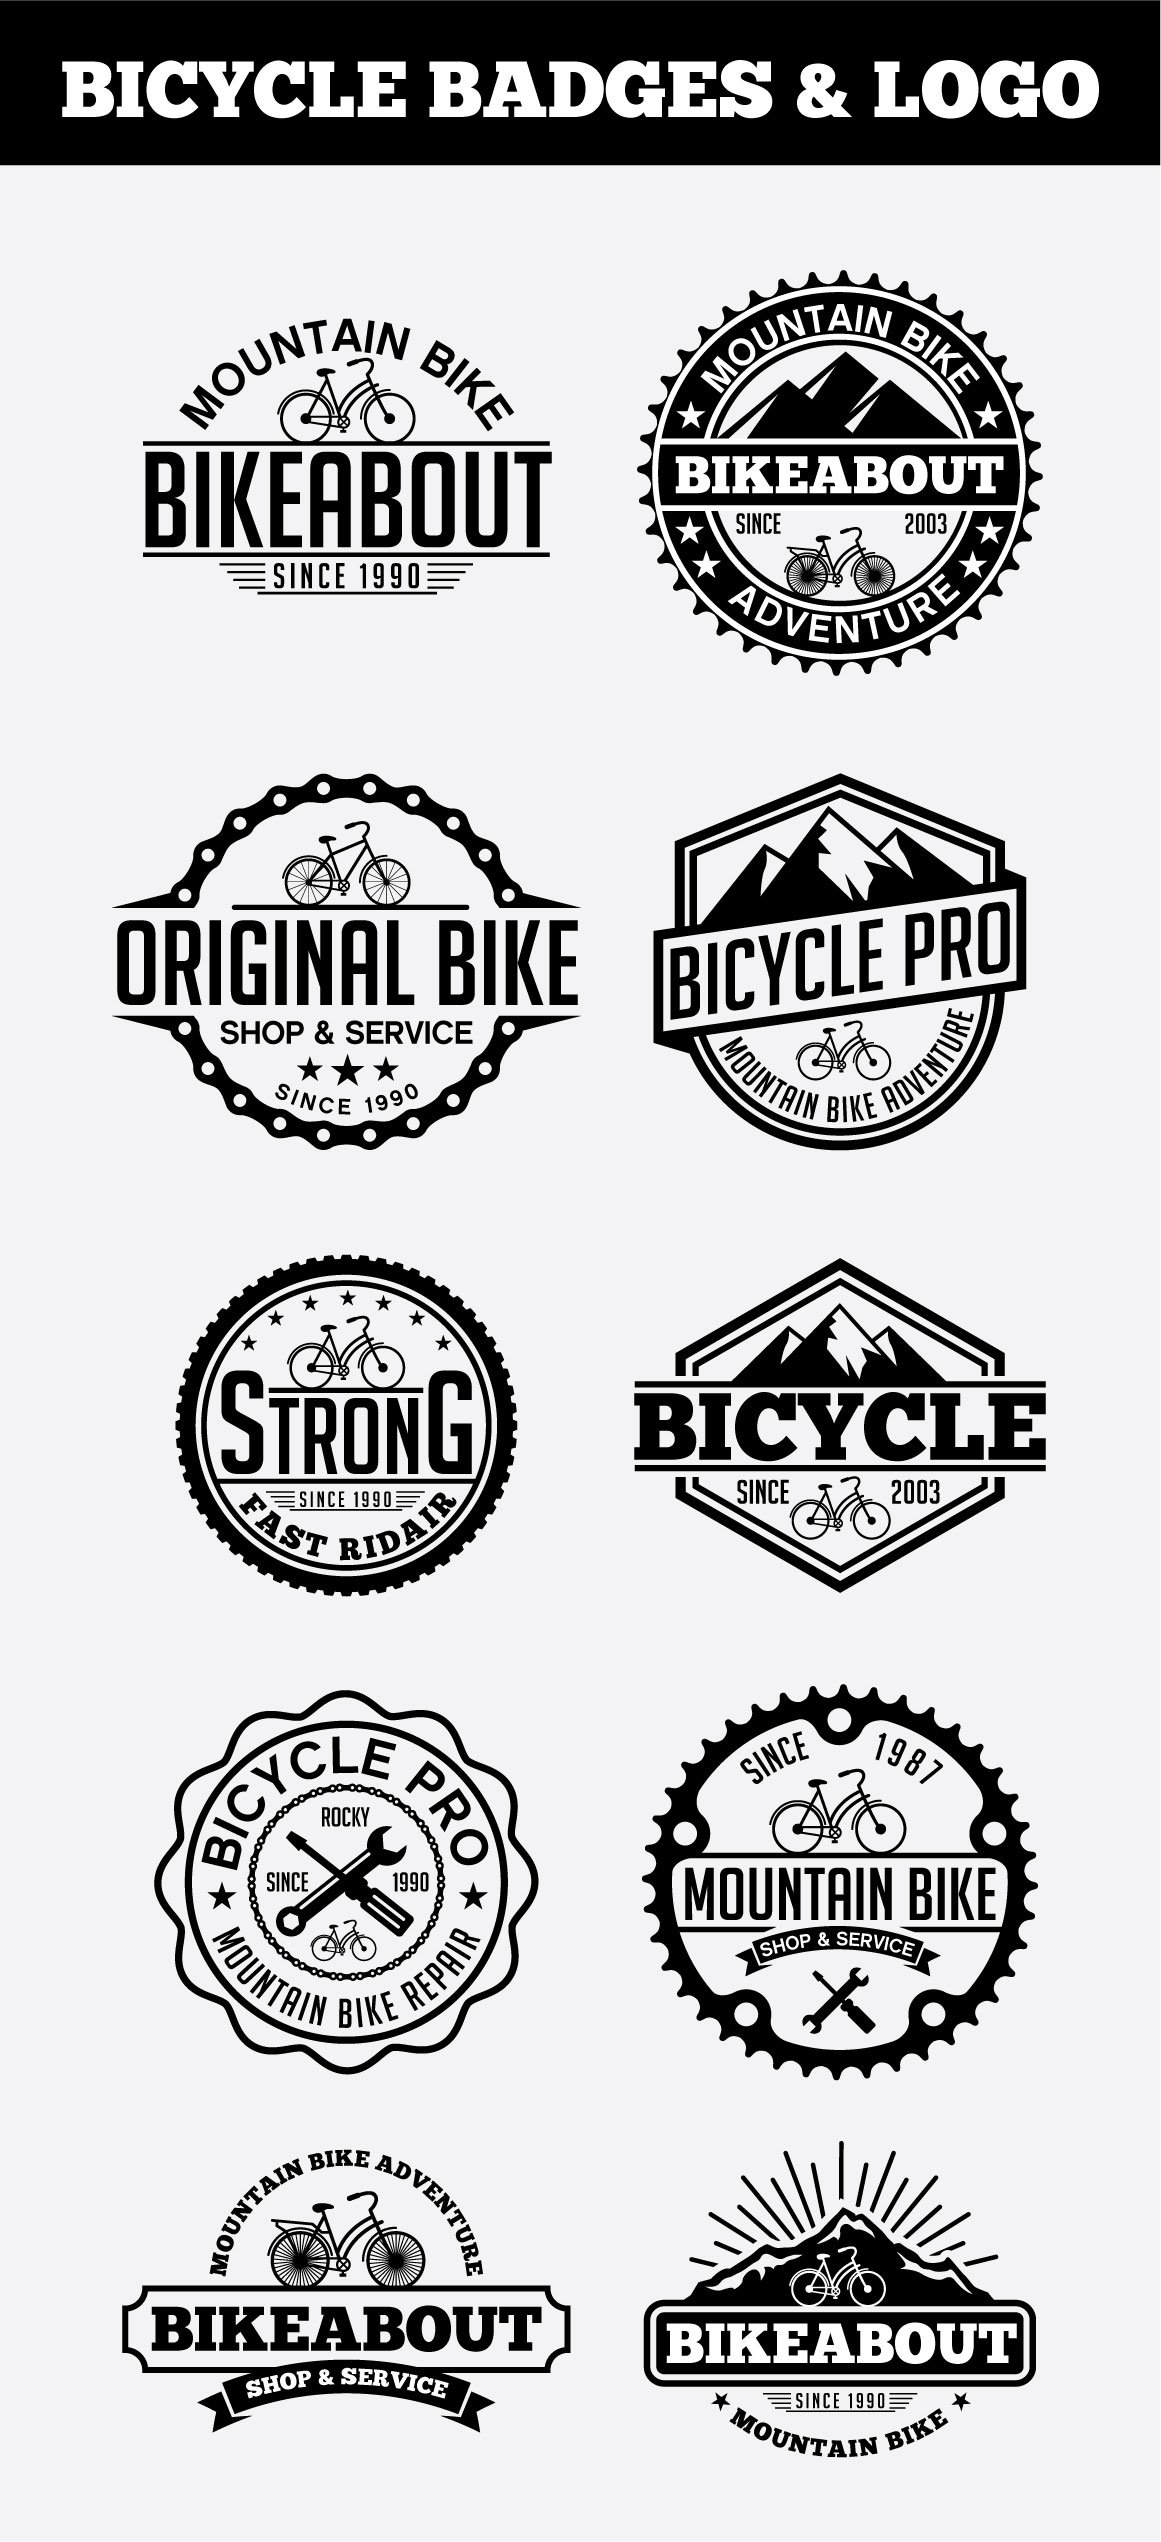 Sport Bicycle Badges & LogoVol1 cover image.